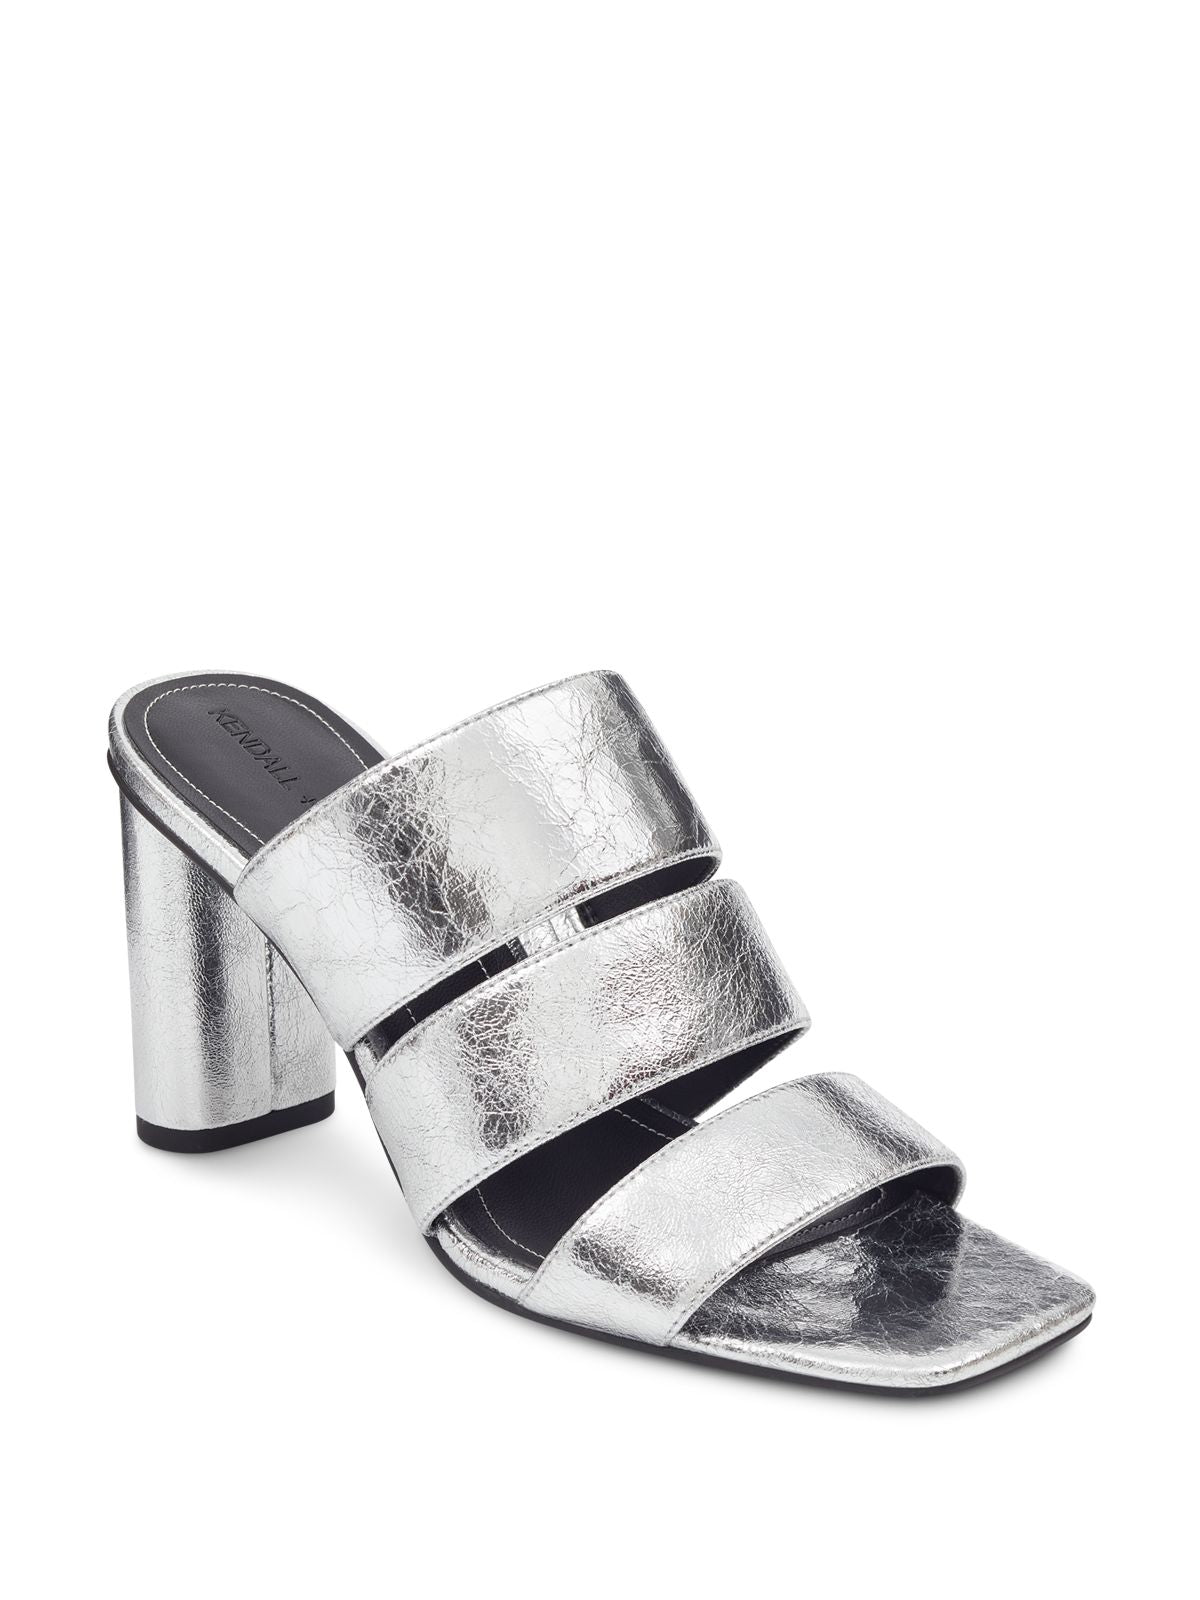 KENDALL + KYLIE Womens Silver Metallic Strappy Leila Square Toe Block Heel Slip On Leather Dress Sandals Shoes 6.5 M